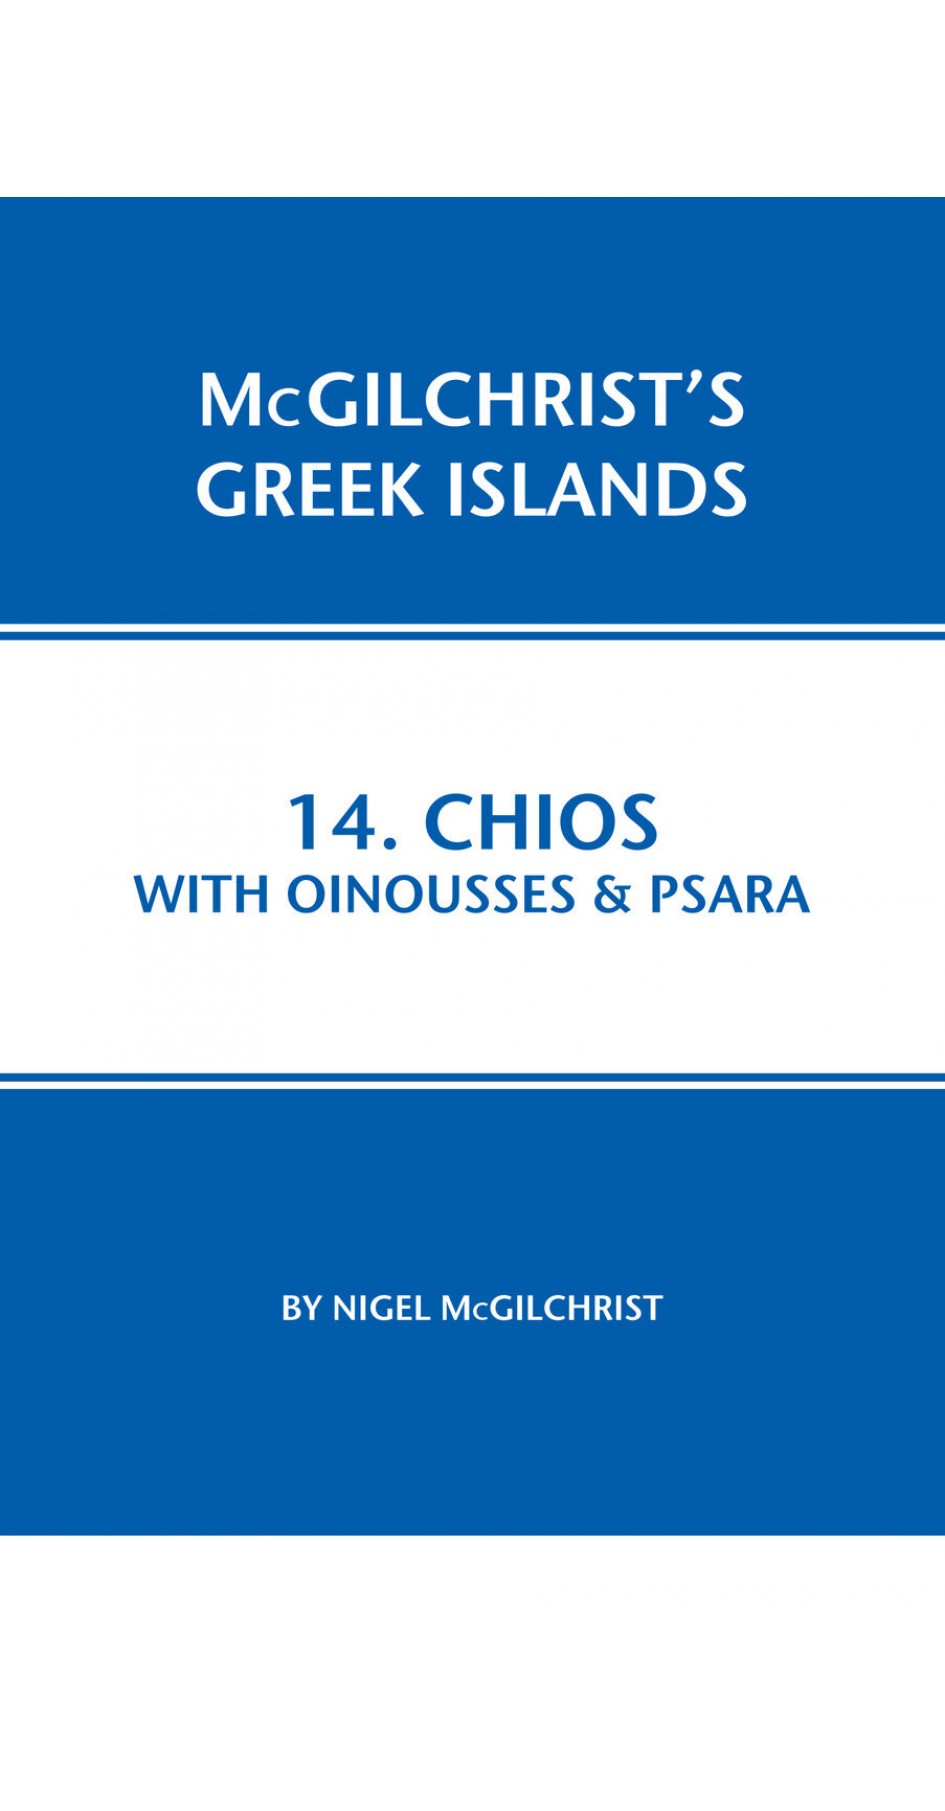 14. Chios with Oinousses & Psara - McGilchrist’s Greek Islands